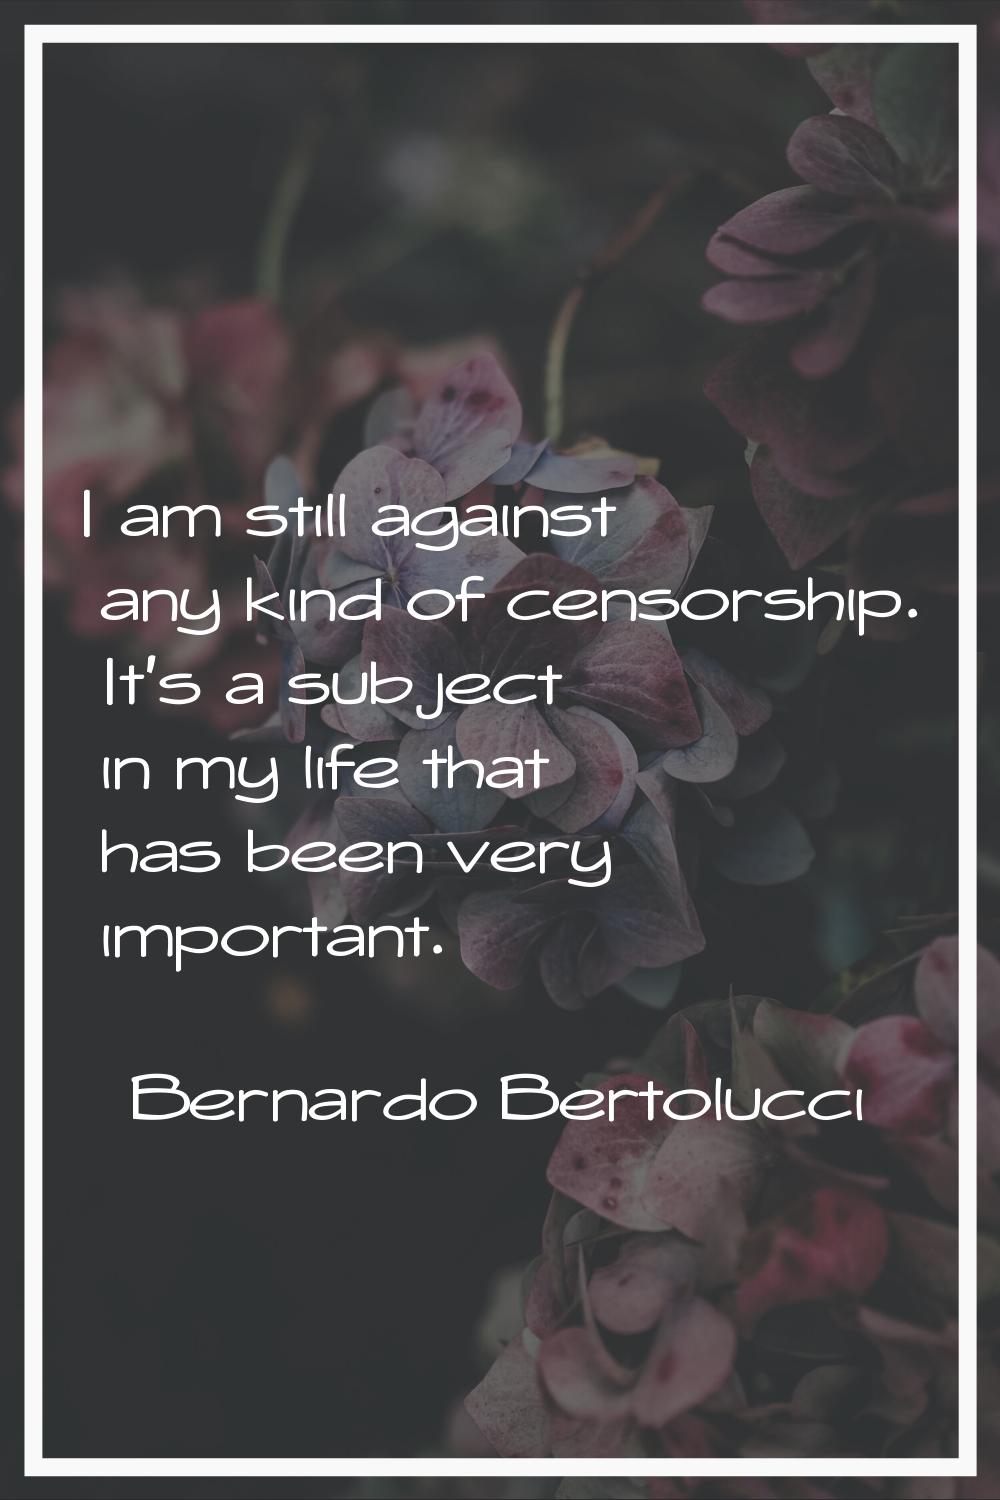 I am still against any kind of censorship. It's a subject in my life that has been very important.